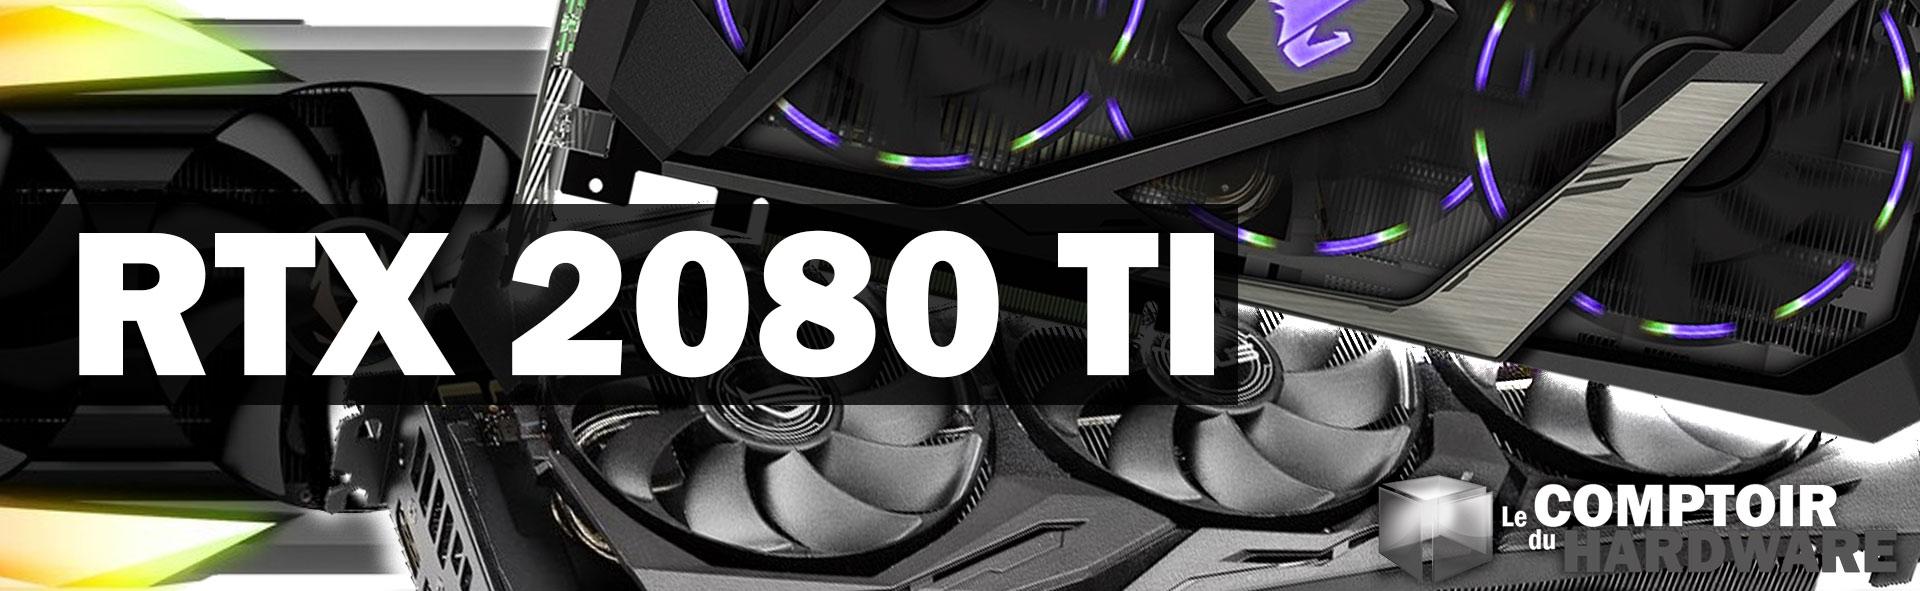 all rtx 2080 ti on the french market